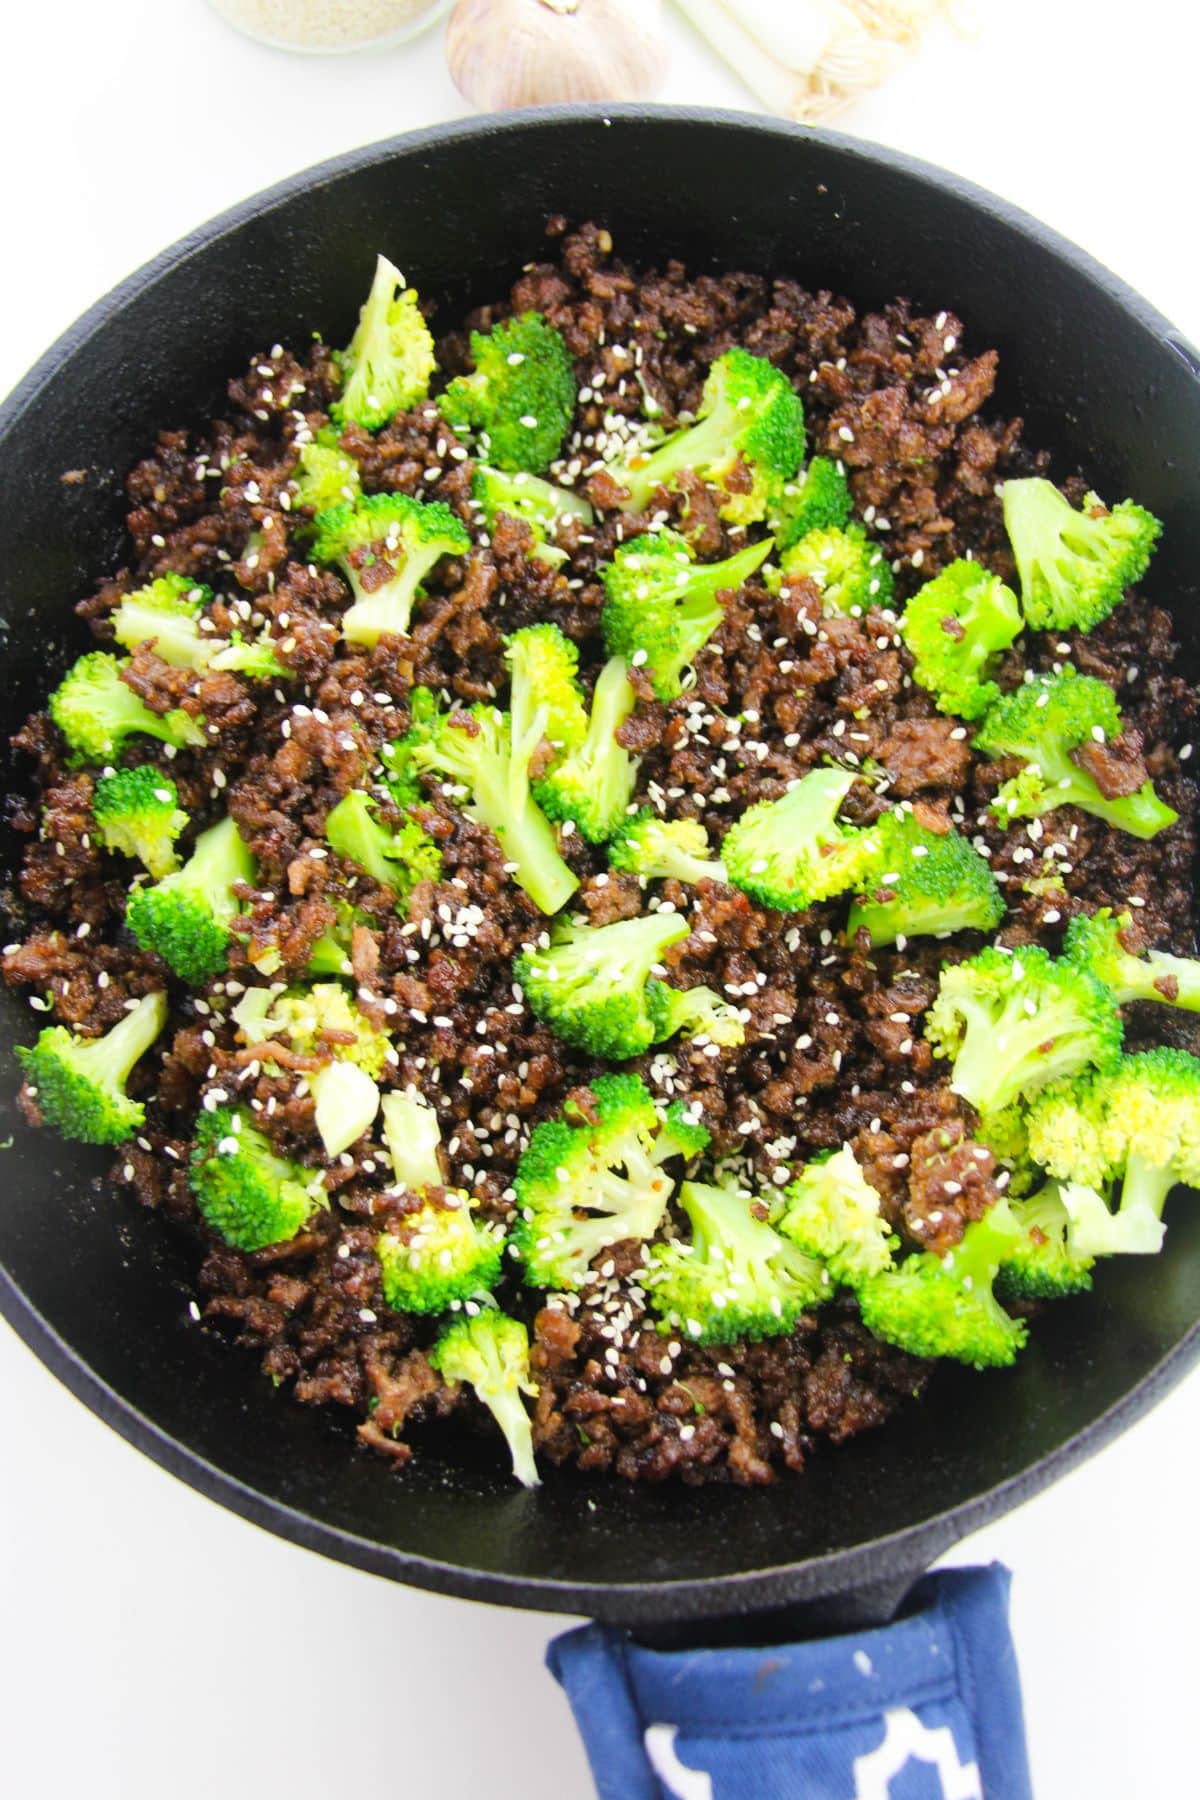 Broccoli and sesame seeds are added to the beef mixture.